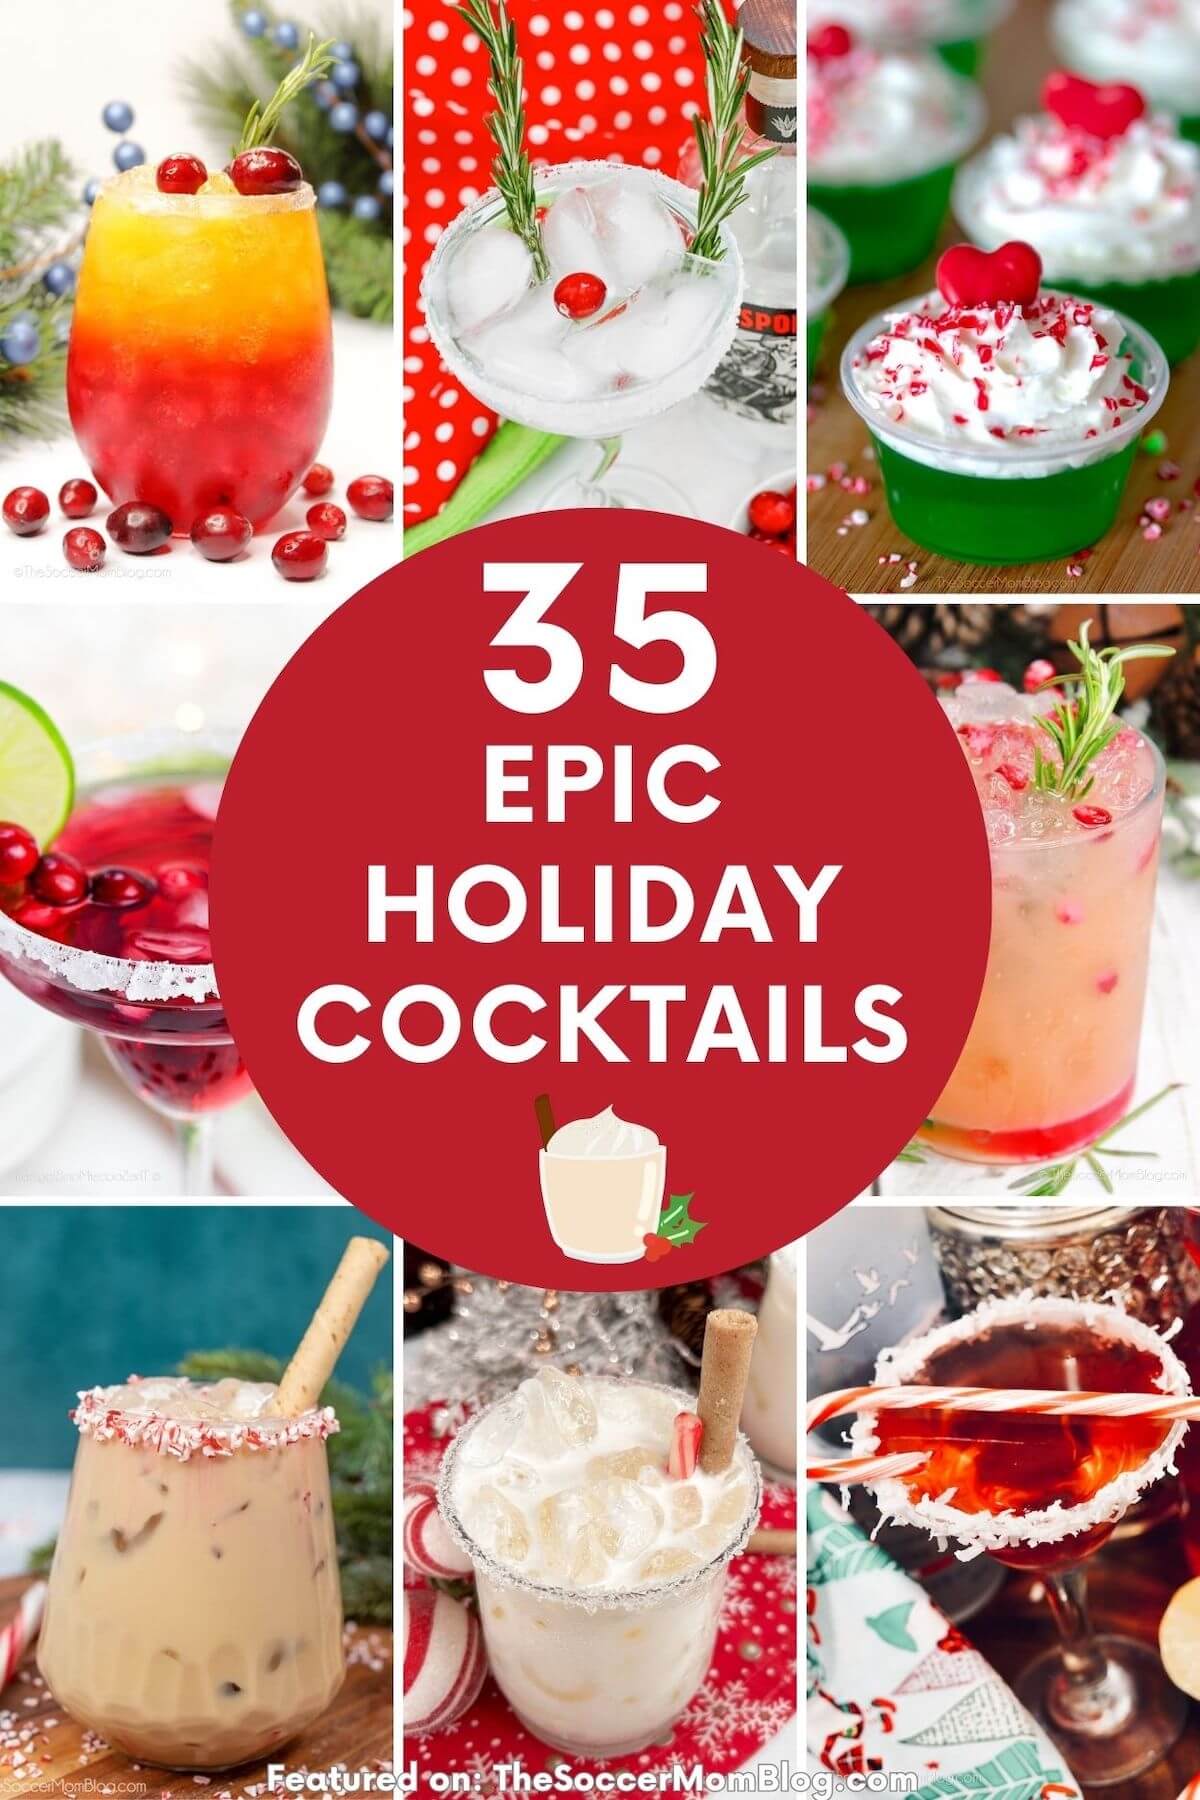 https://thesoccermomblog.com/wp-content/uploads/2022/12/Holiday-Cocktail-Recipes-pin23.jpg